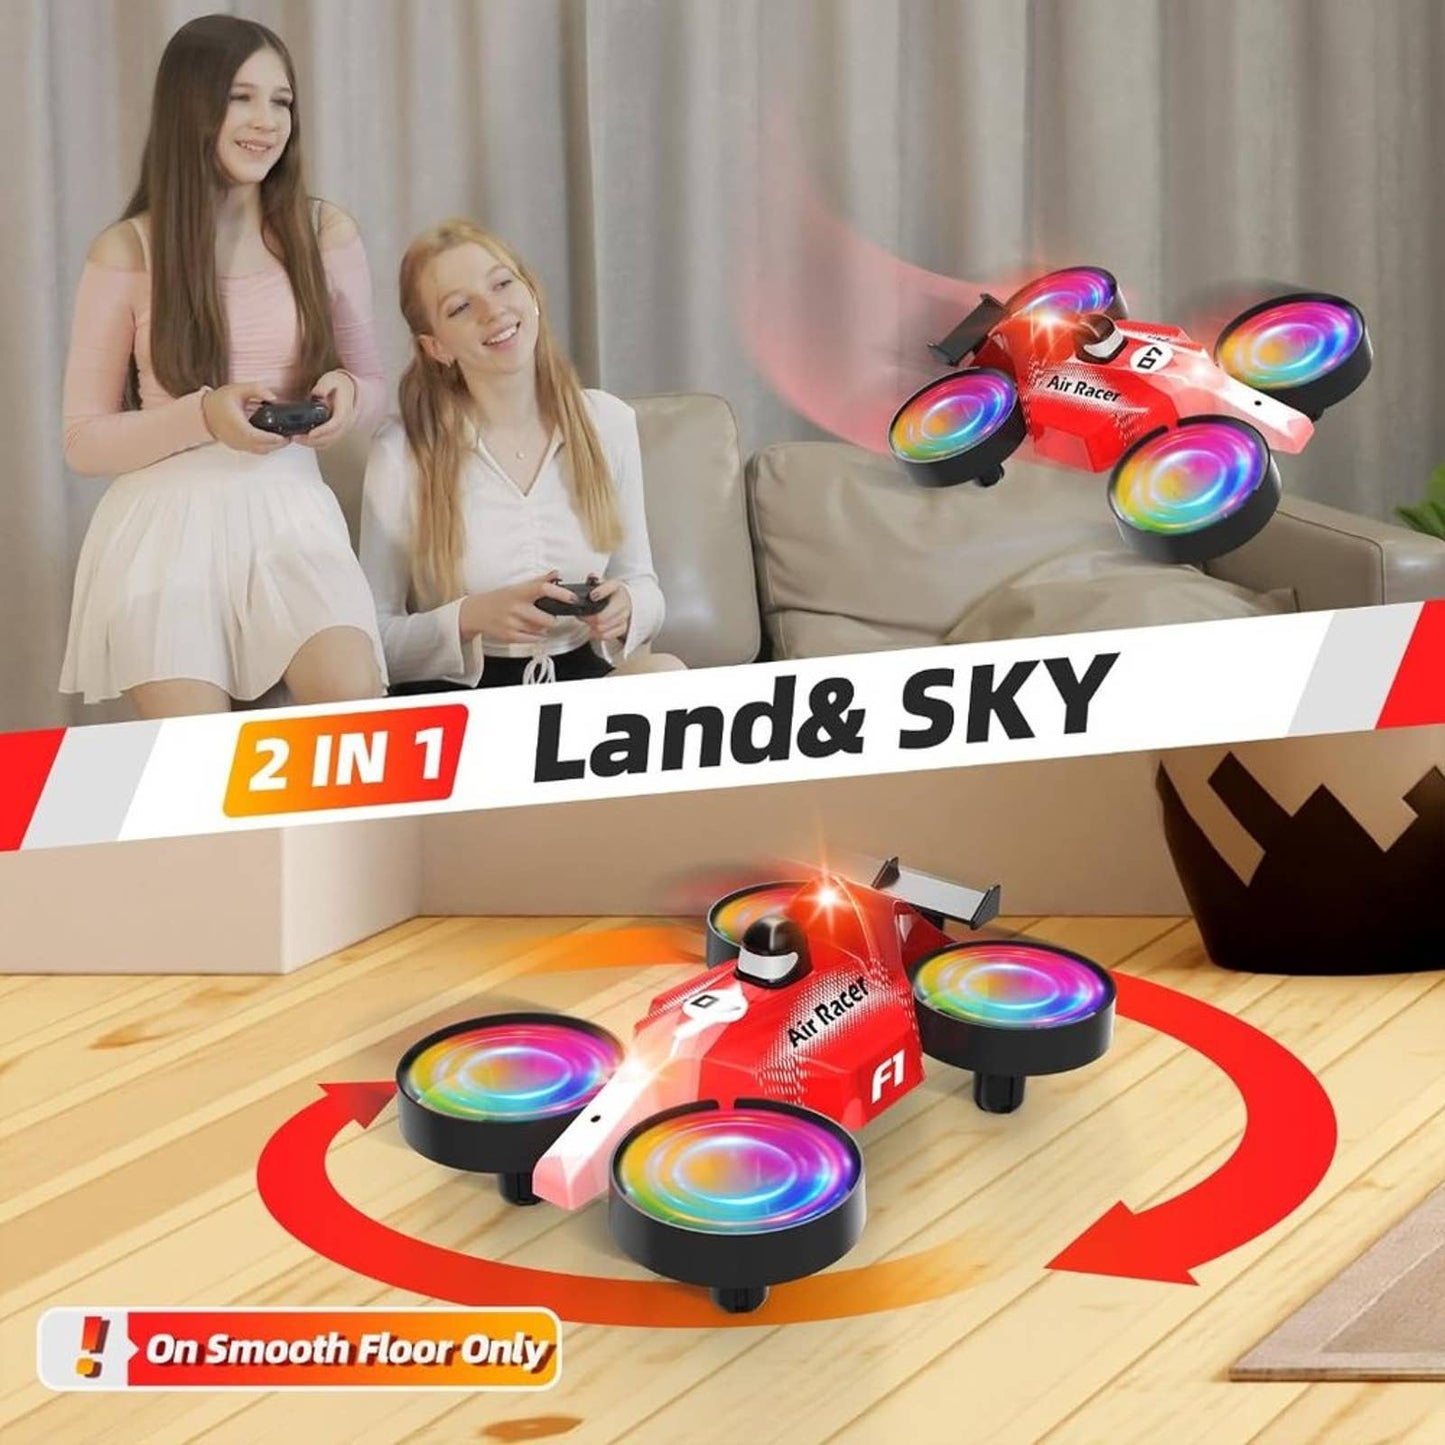 LM07 Mini Drone for Kids, LED Drones for Beginners, Small Indoor RC Quadcopter